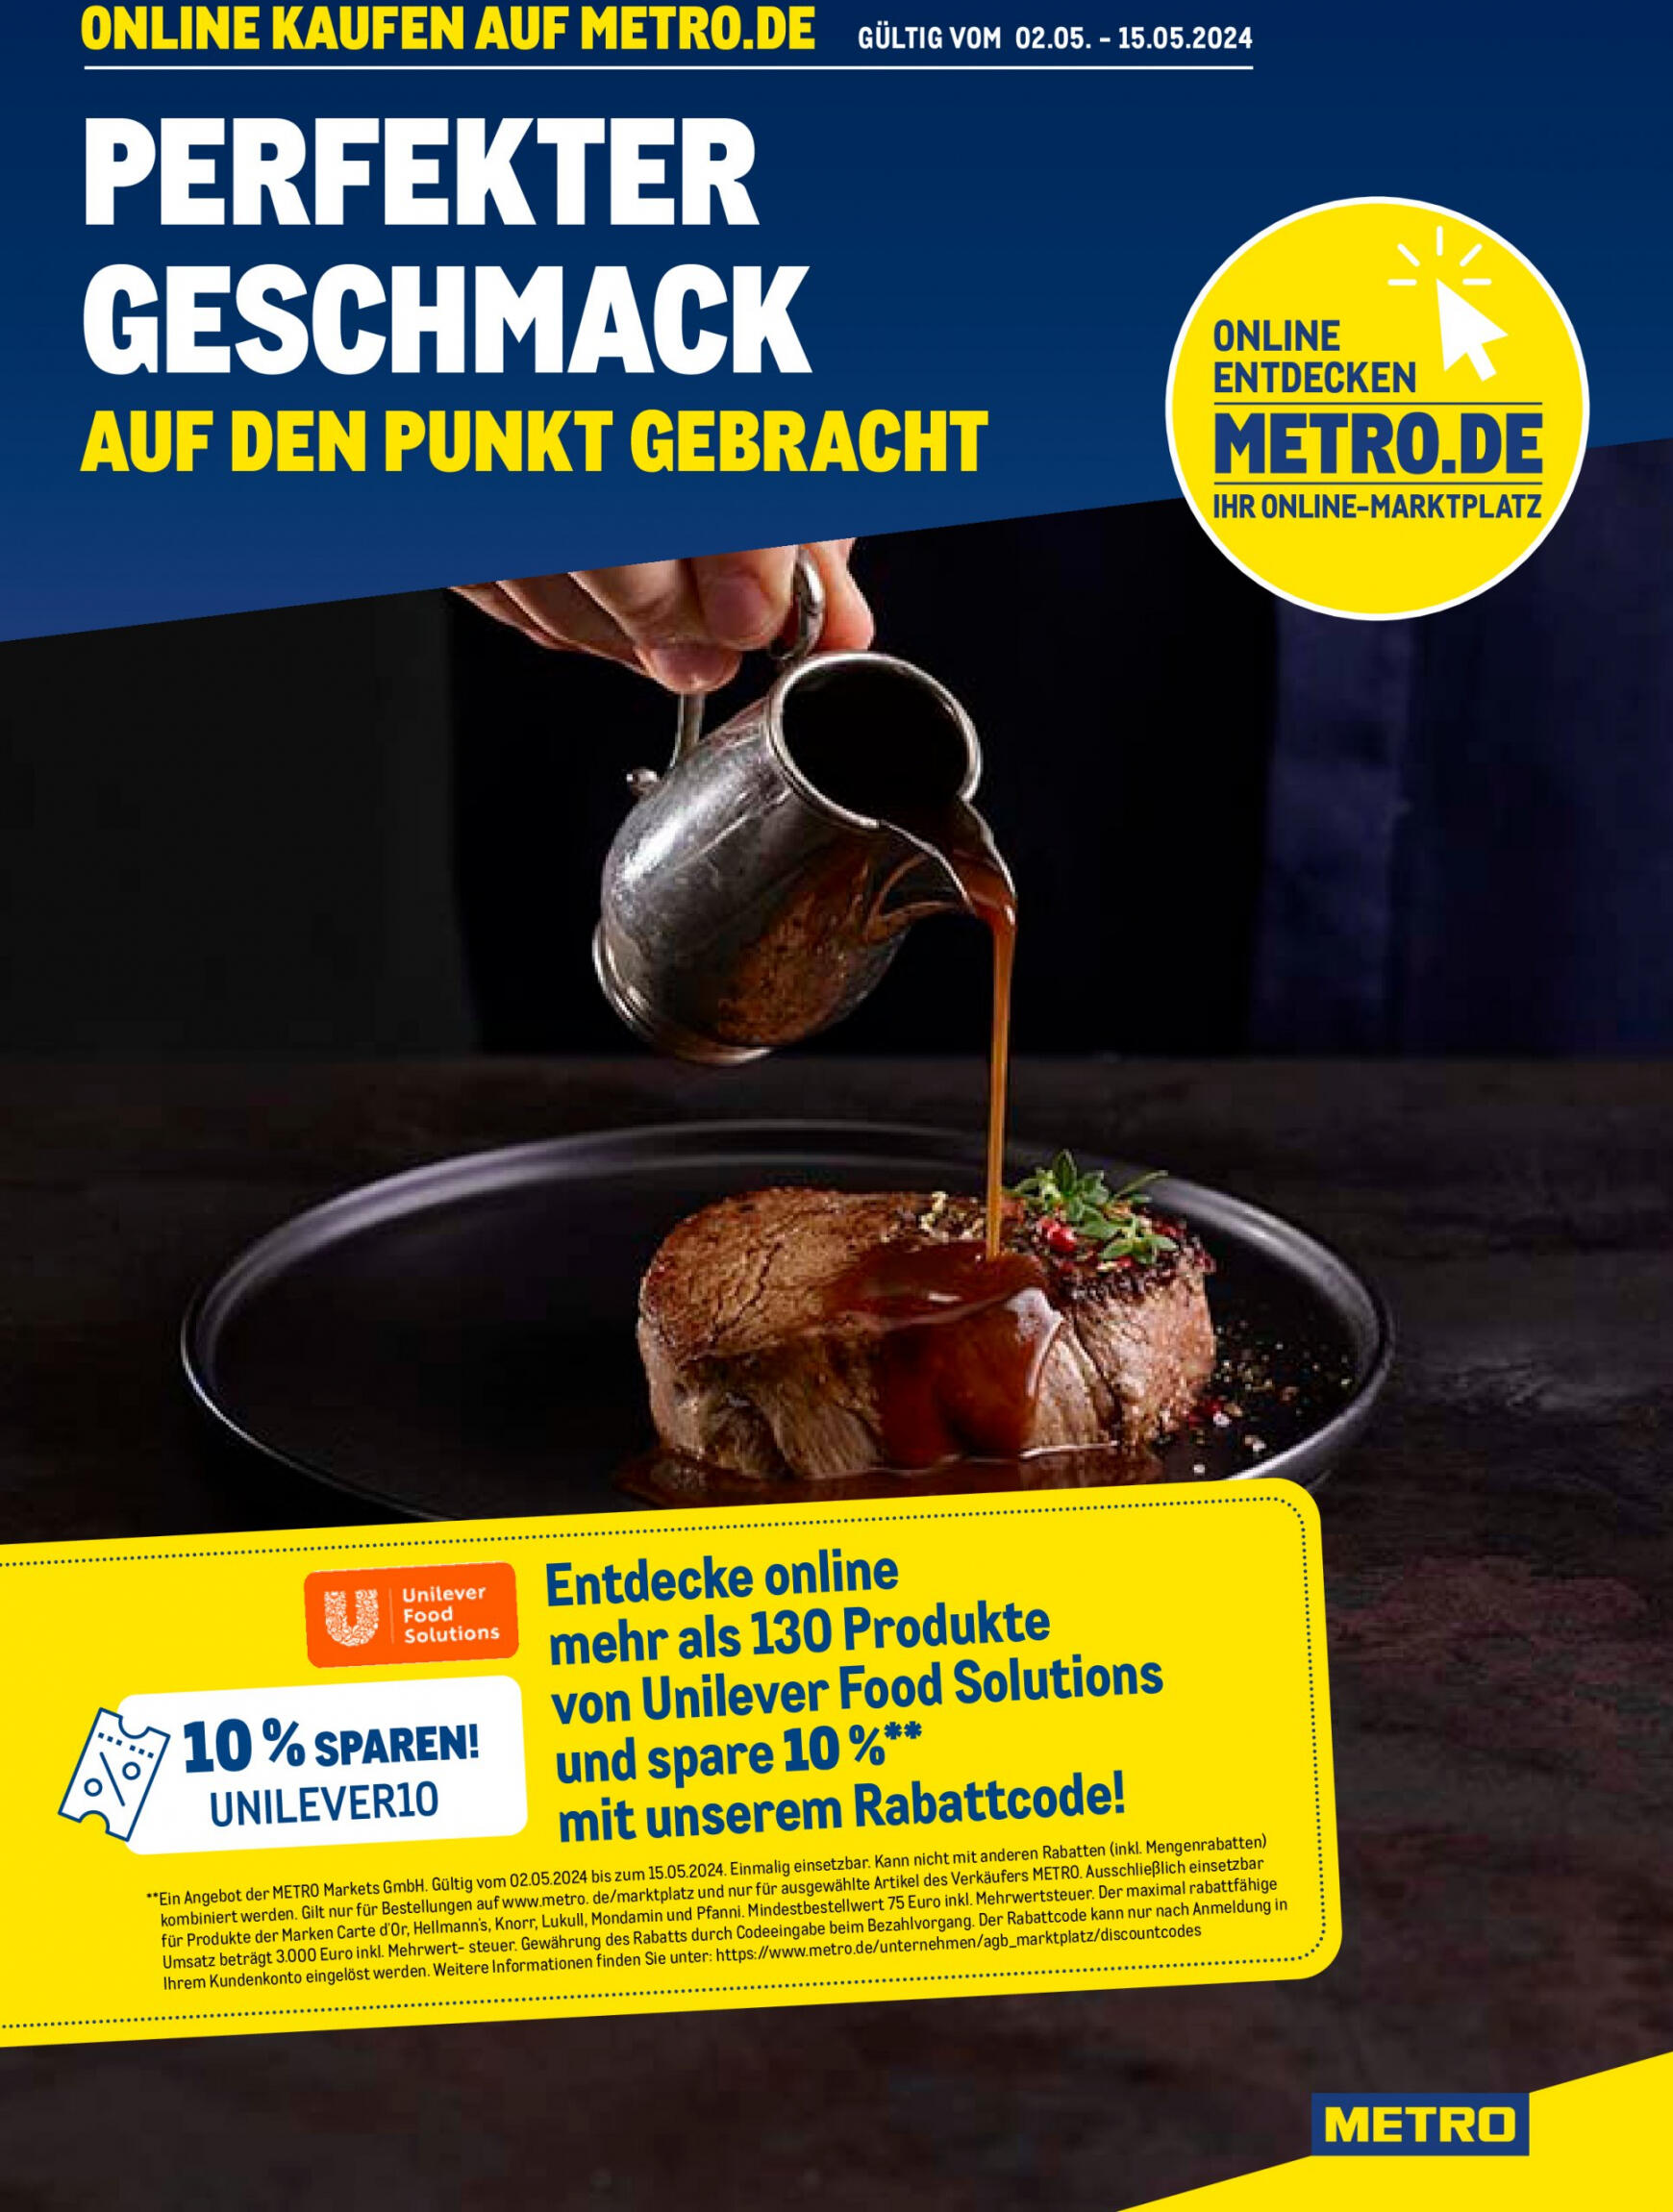 metro - Flyer Metro - Unilever Food Solution aktuell 02.05. - 15.05. - page: 1